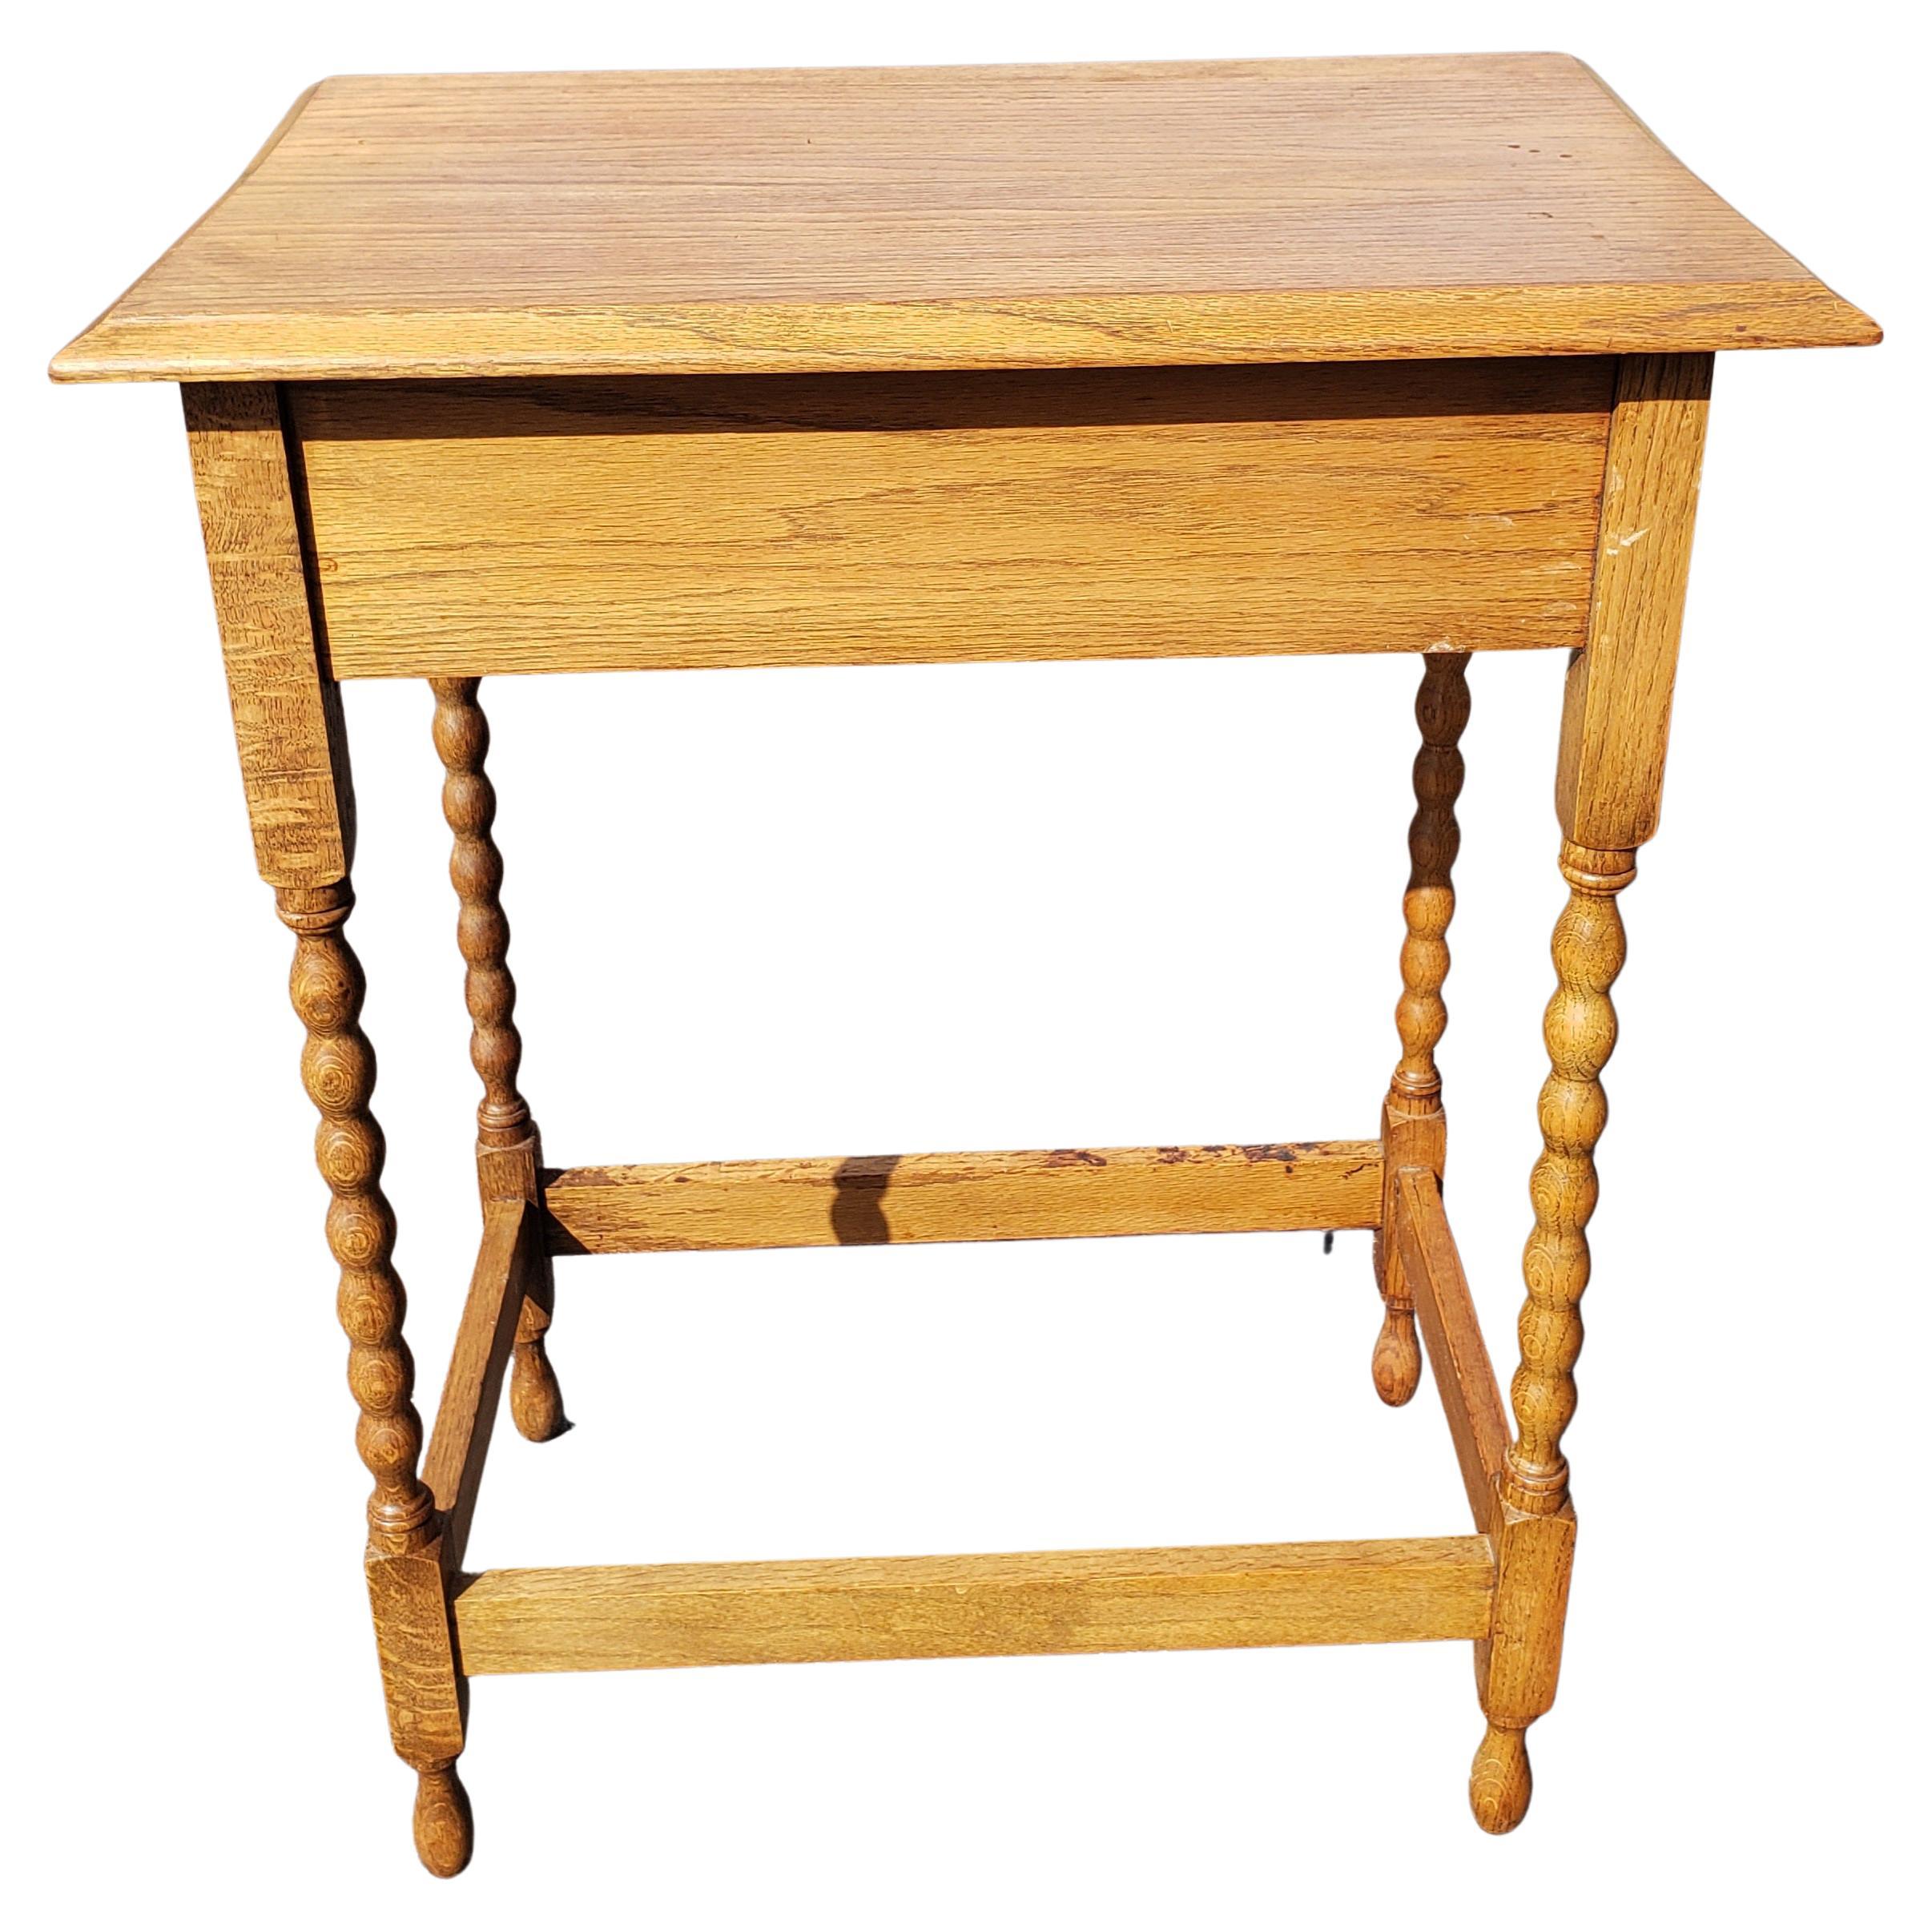 Vintage English One Drawer Oak Industrial side table. Good vintage condition. 
Wear appropriate with age and use
Measures 24